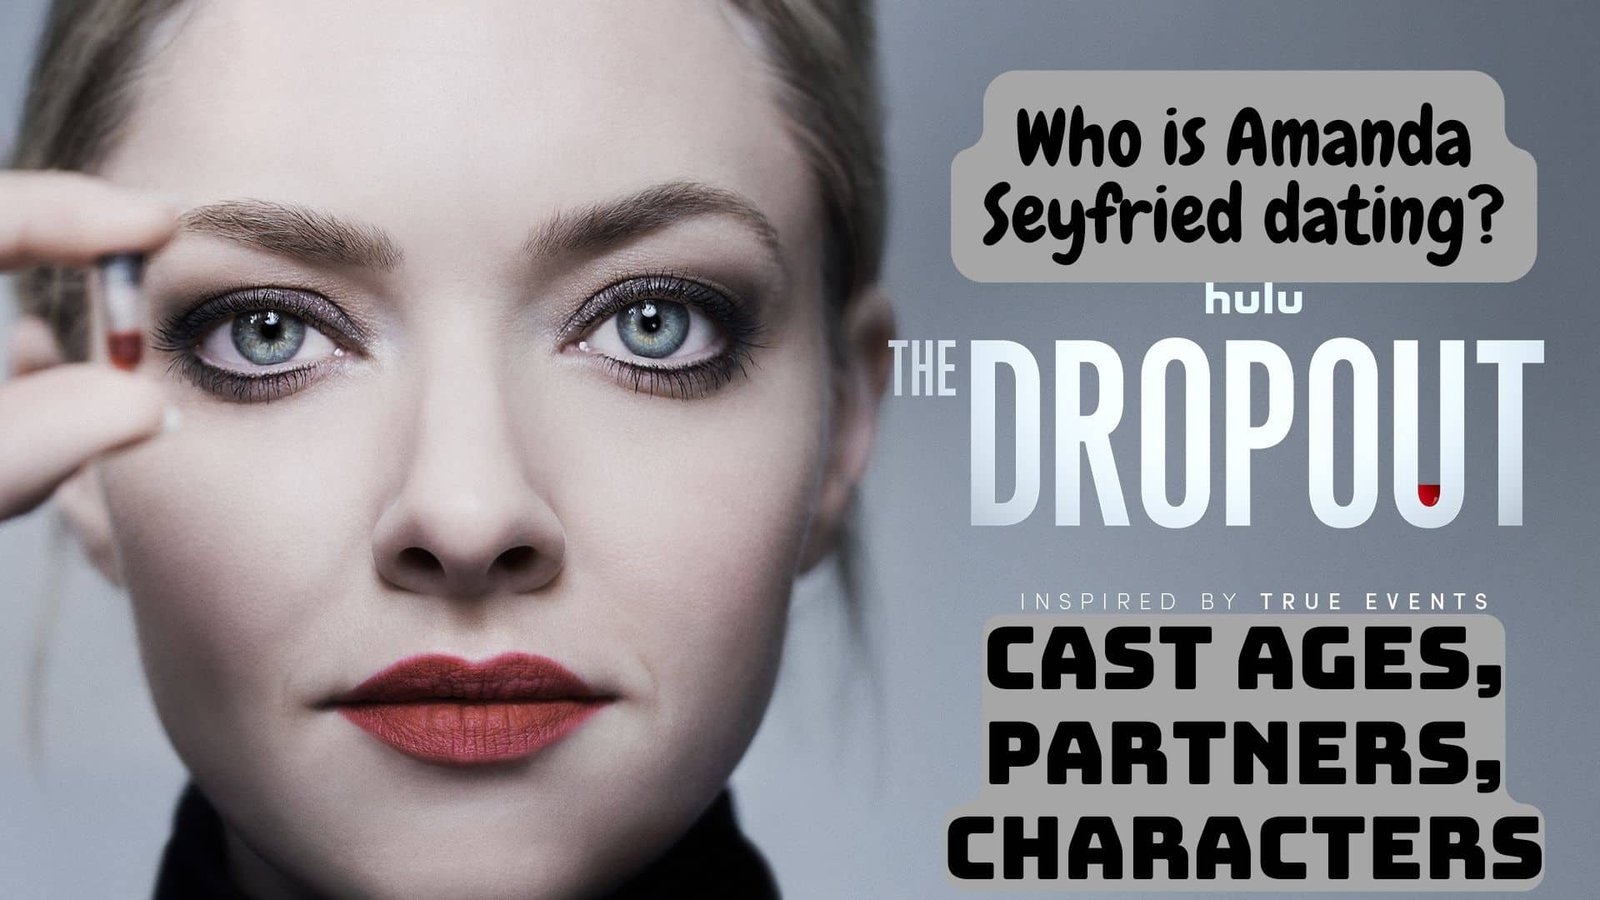 The Dropout Cast Ages, Partners, Characters - Who is Amanda Seyfried dating?